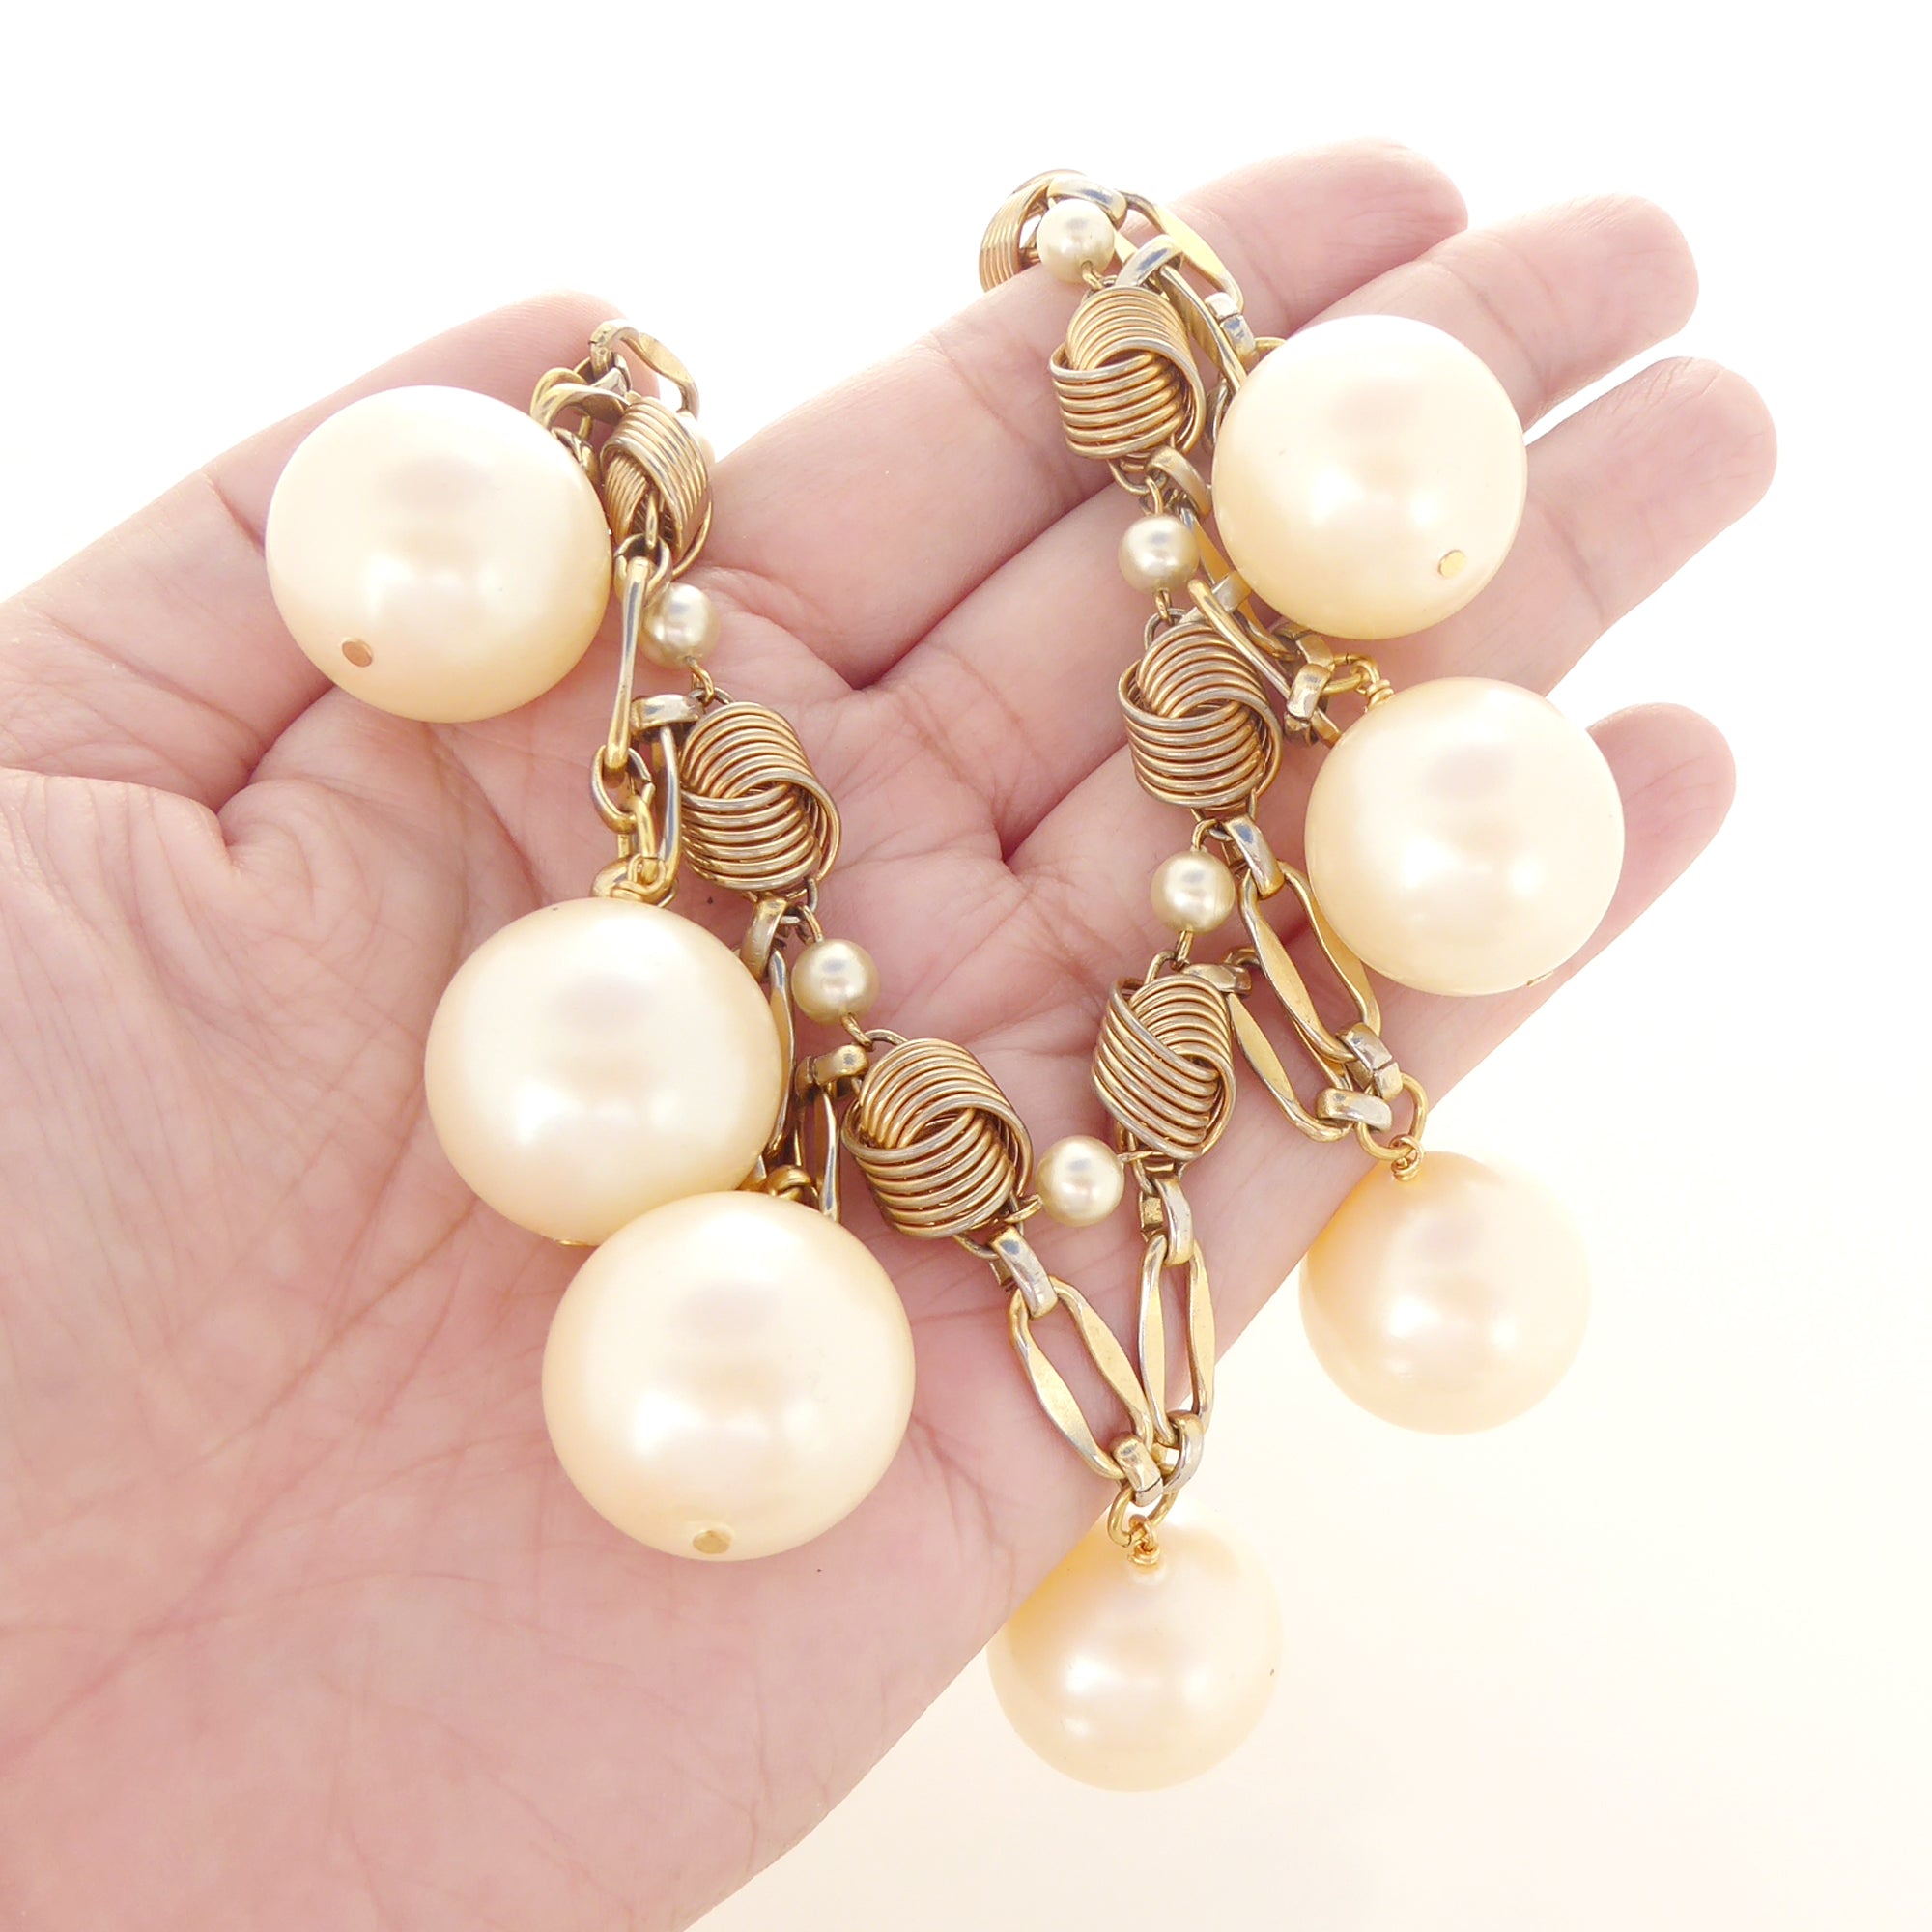 Pearl orb necklace by Jenny Dayco 6